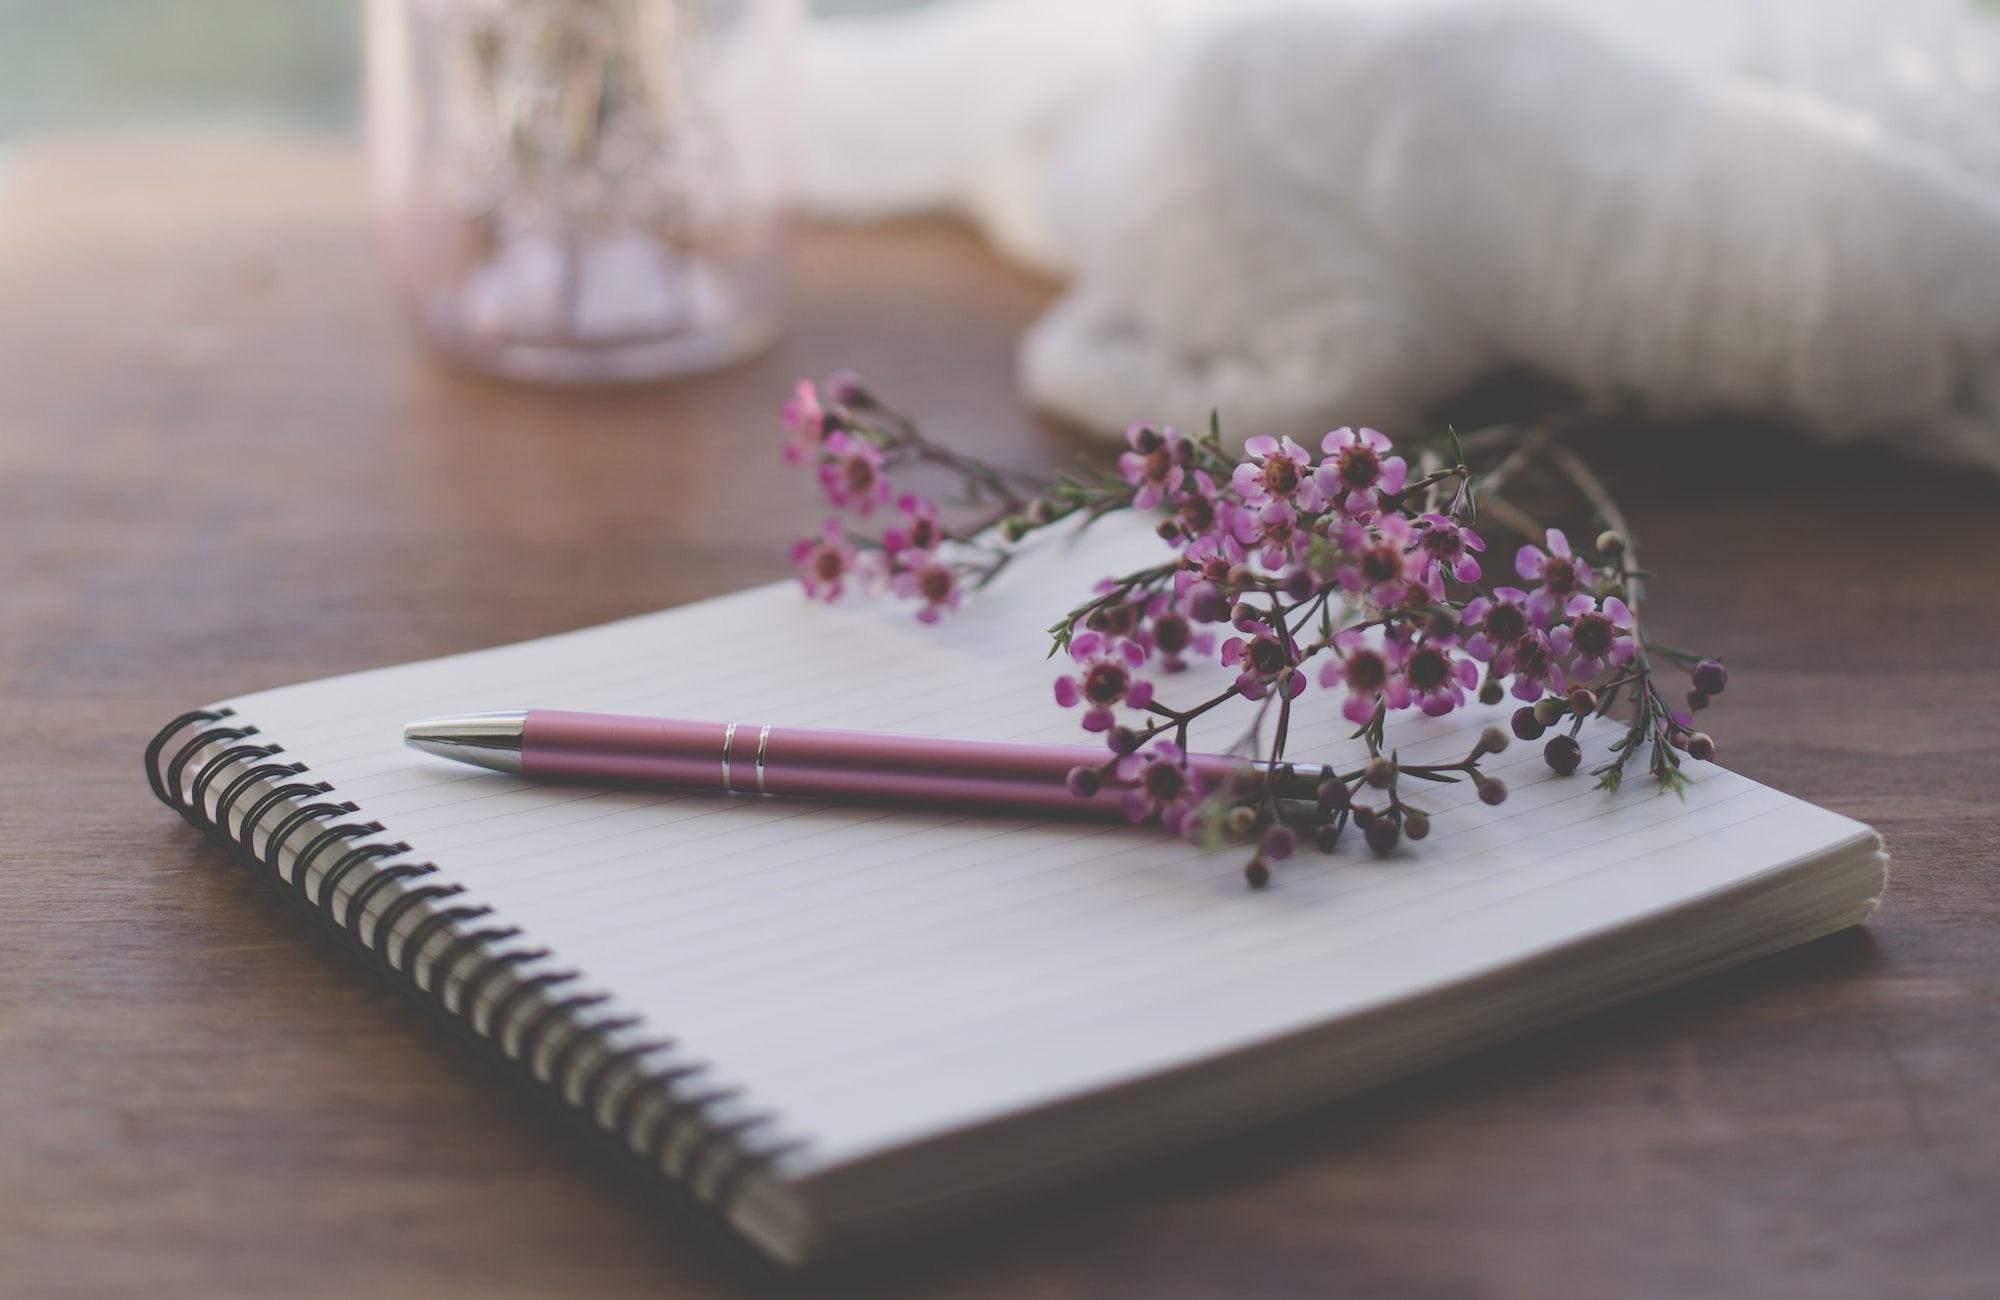 The health benefits of journaling for caregivers